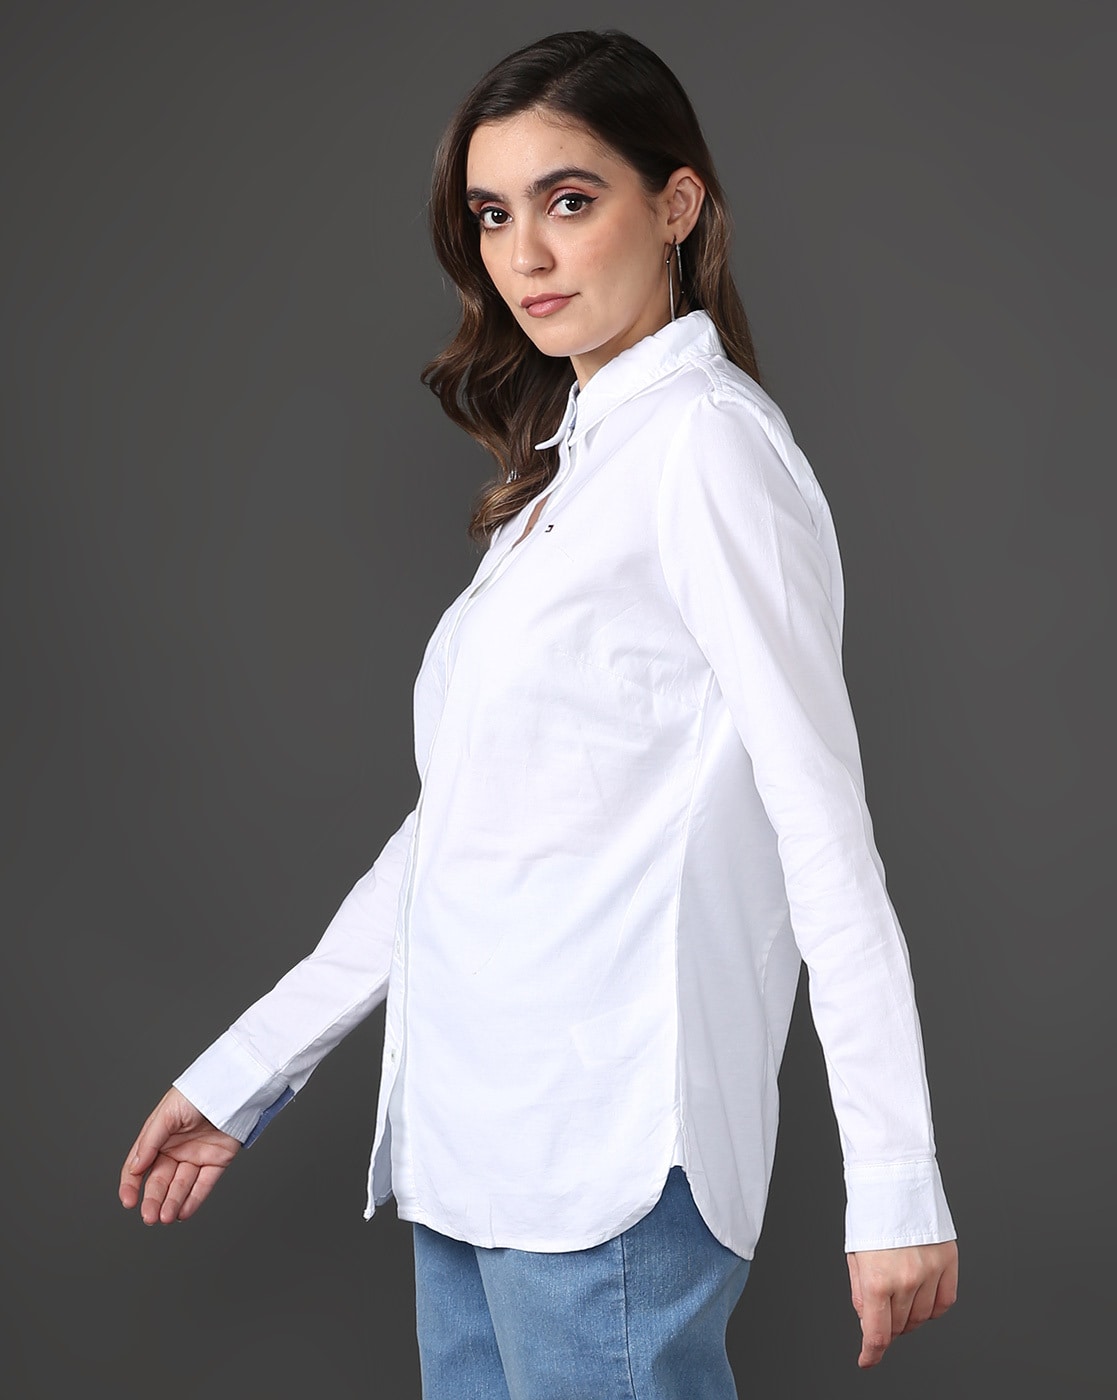 TOMMY HILFIGER Women Solid Casual White Shirt - Buy TOMMY HILFIGER Women  Solid Casual White Shirt Online at Best Prices in India